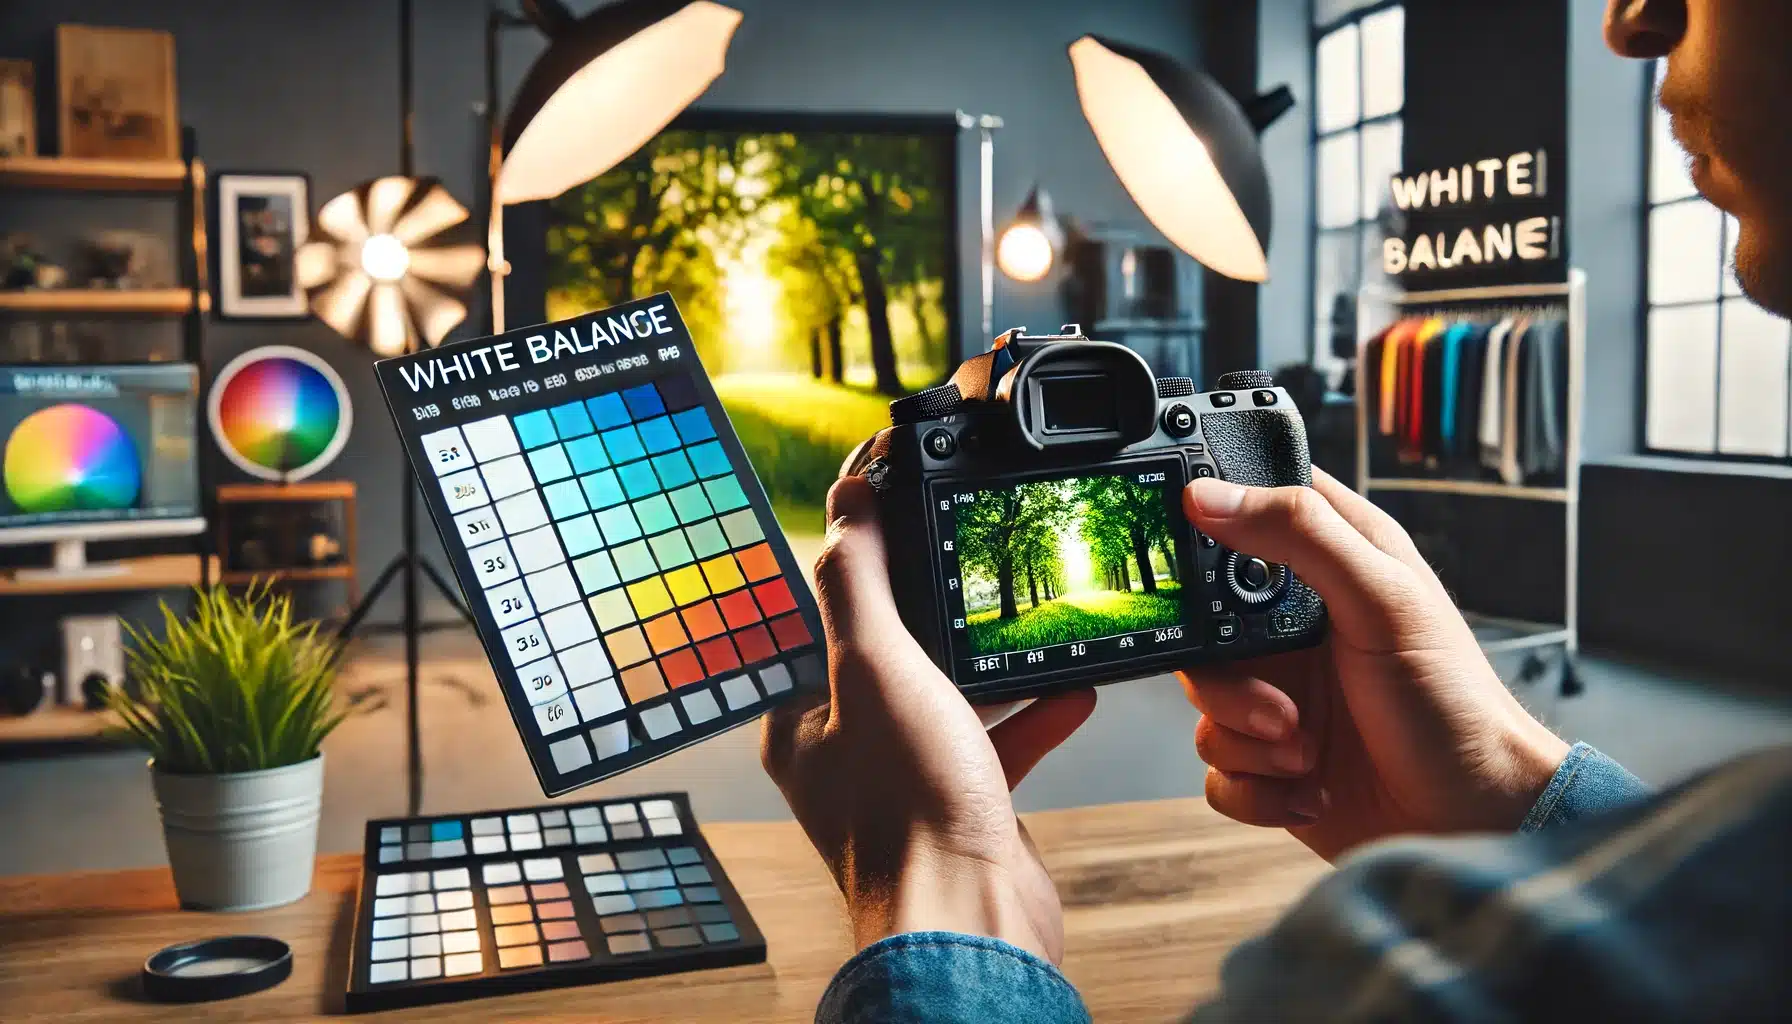 A photographer adjusting the white balance settings on a camera in a well-lit studio, with a color chart or white balance card in the frame and various photography equipment in the background.